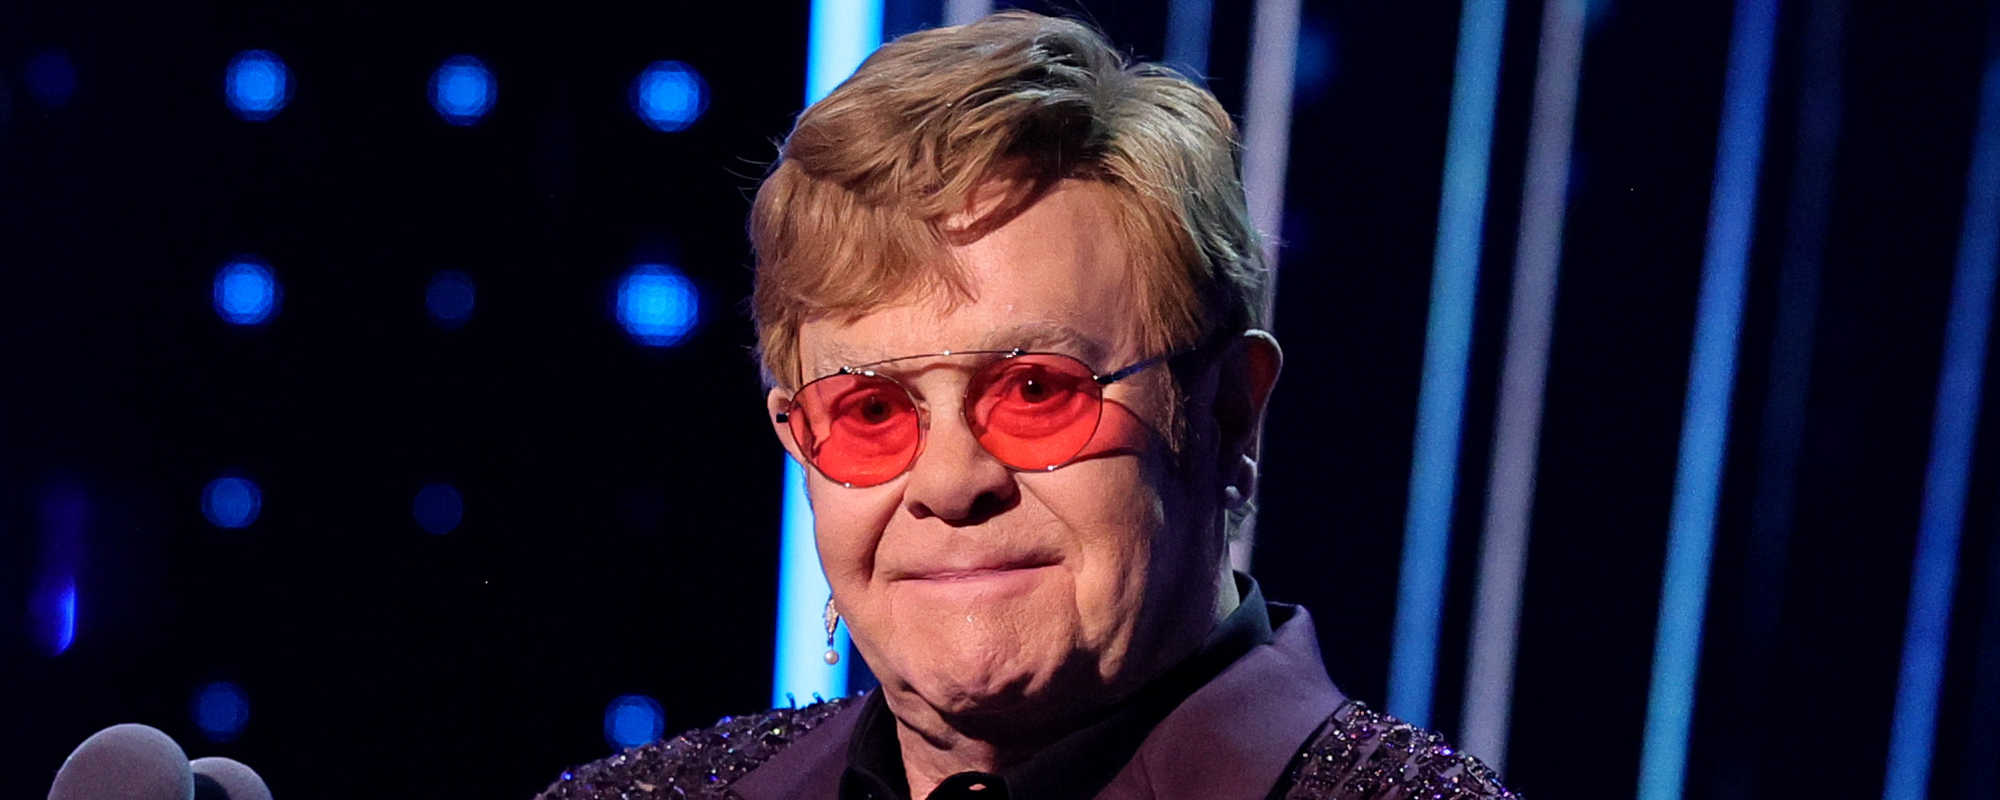 Elton John Done With Touring but Not Music, Rumors Claim He Is Working on New Album